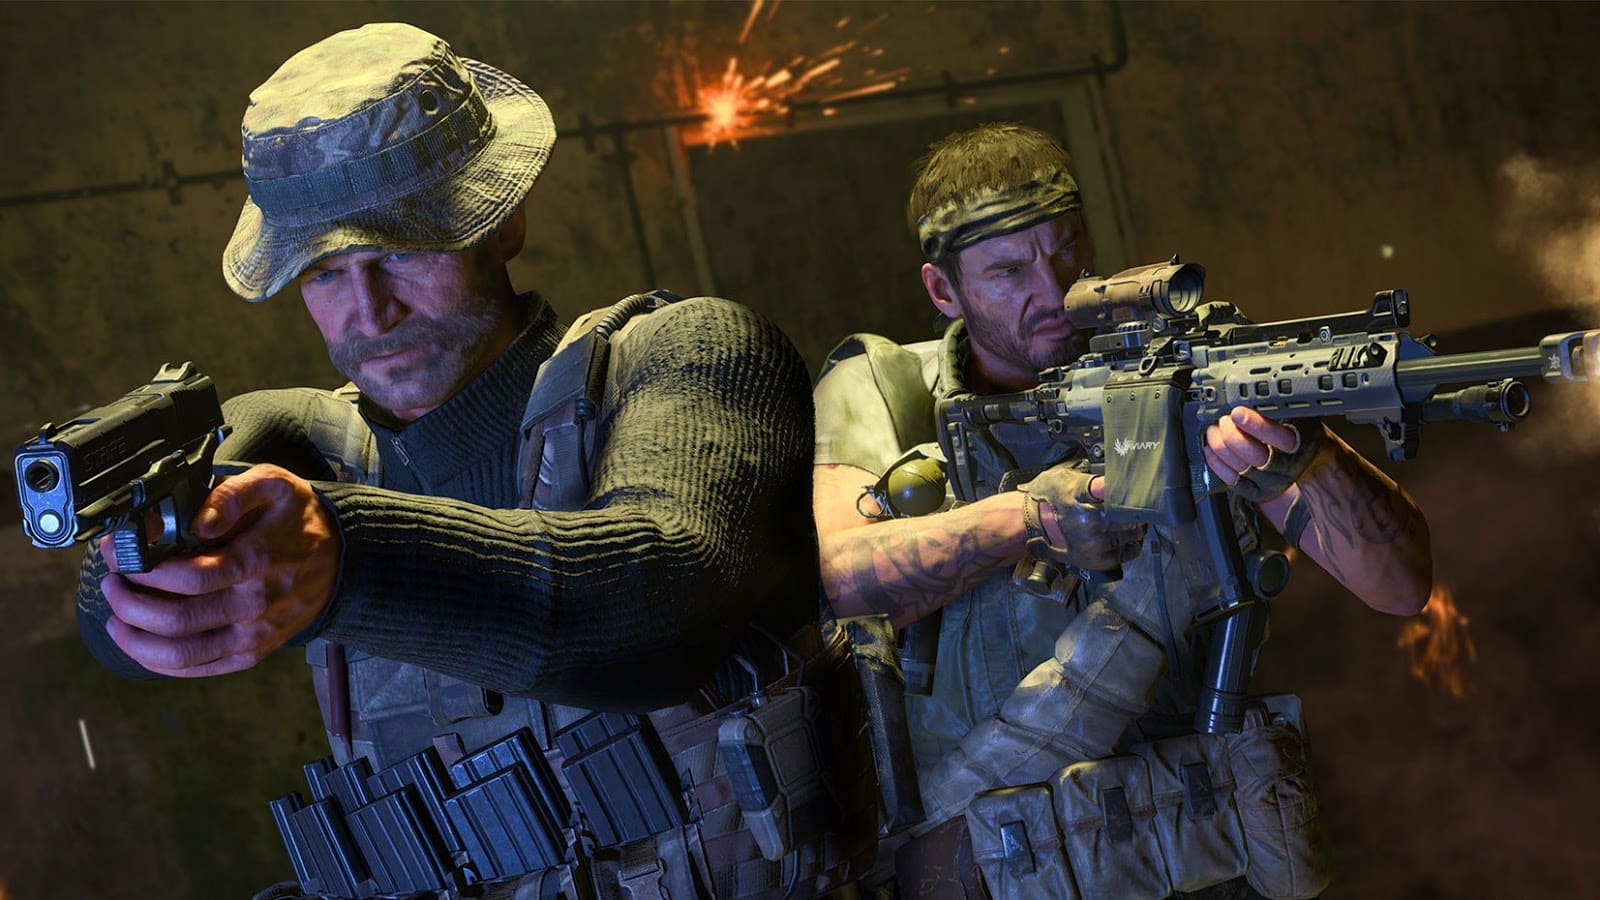 Sgt. Frank Woods Could Be Coming to Modern Warfare in a Black Ops Crossover